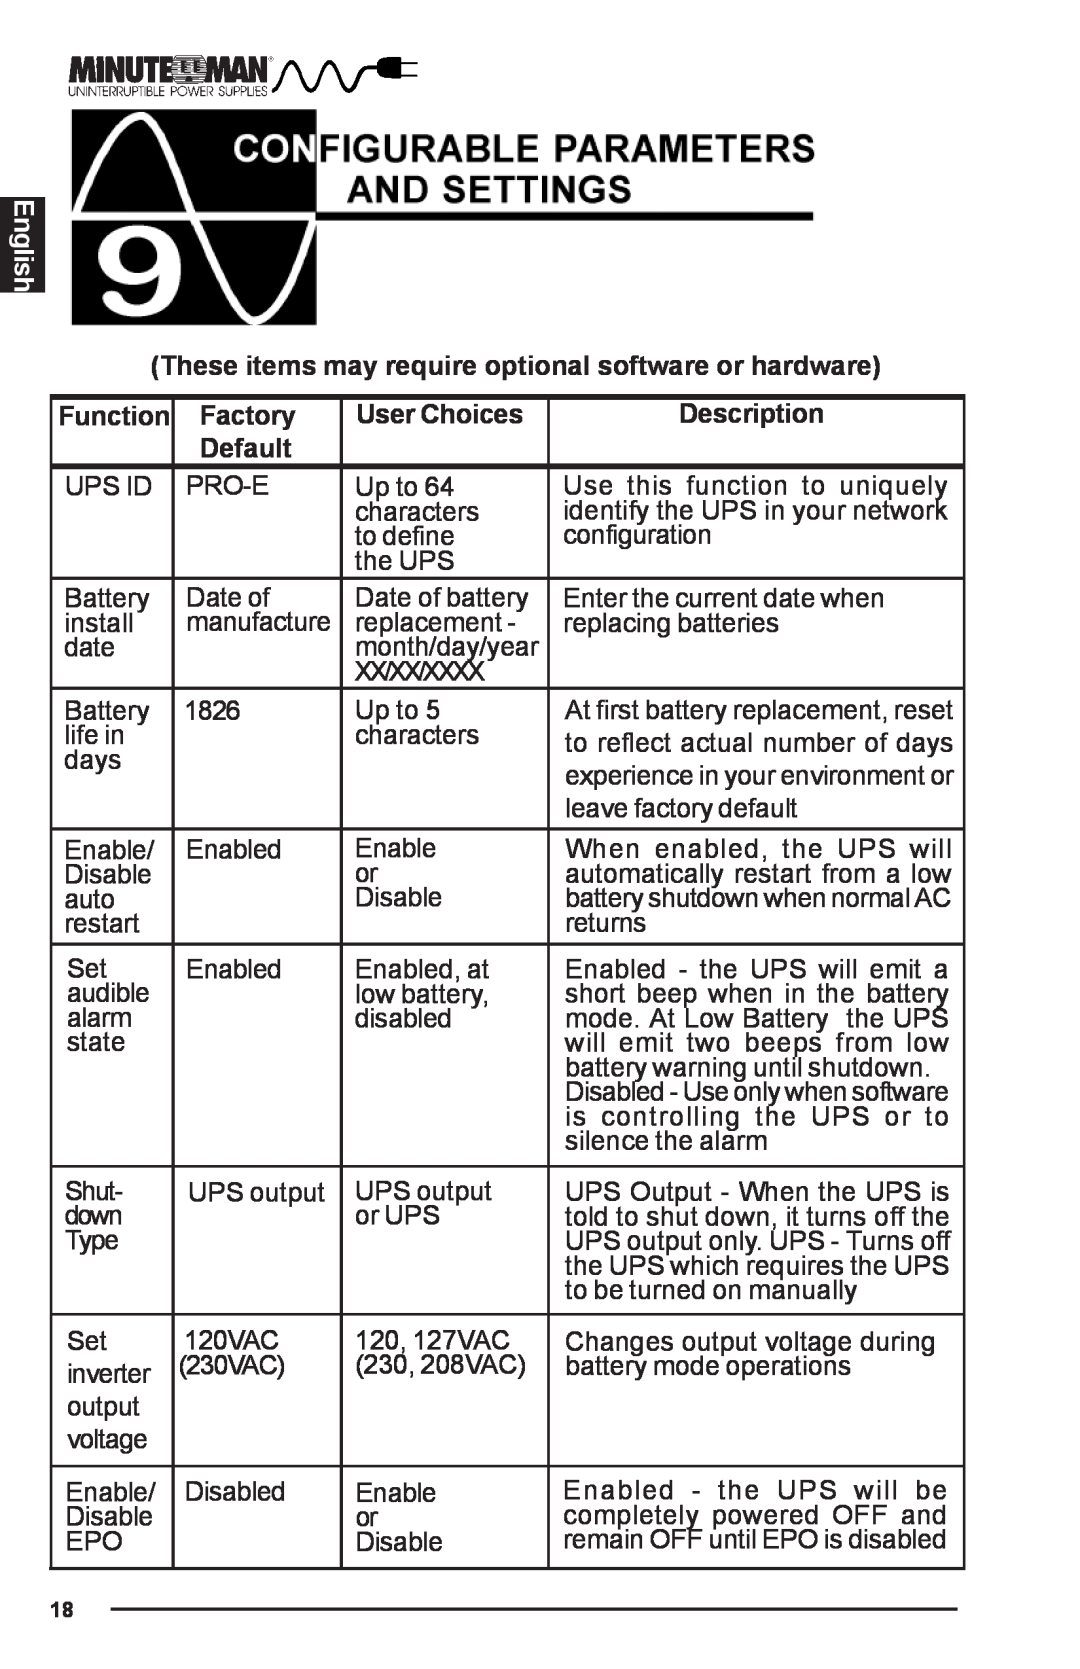 Minuteman UPS PRO-E English, These items may require optional software or hardware, Function, Factory, User Choices 